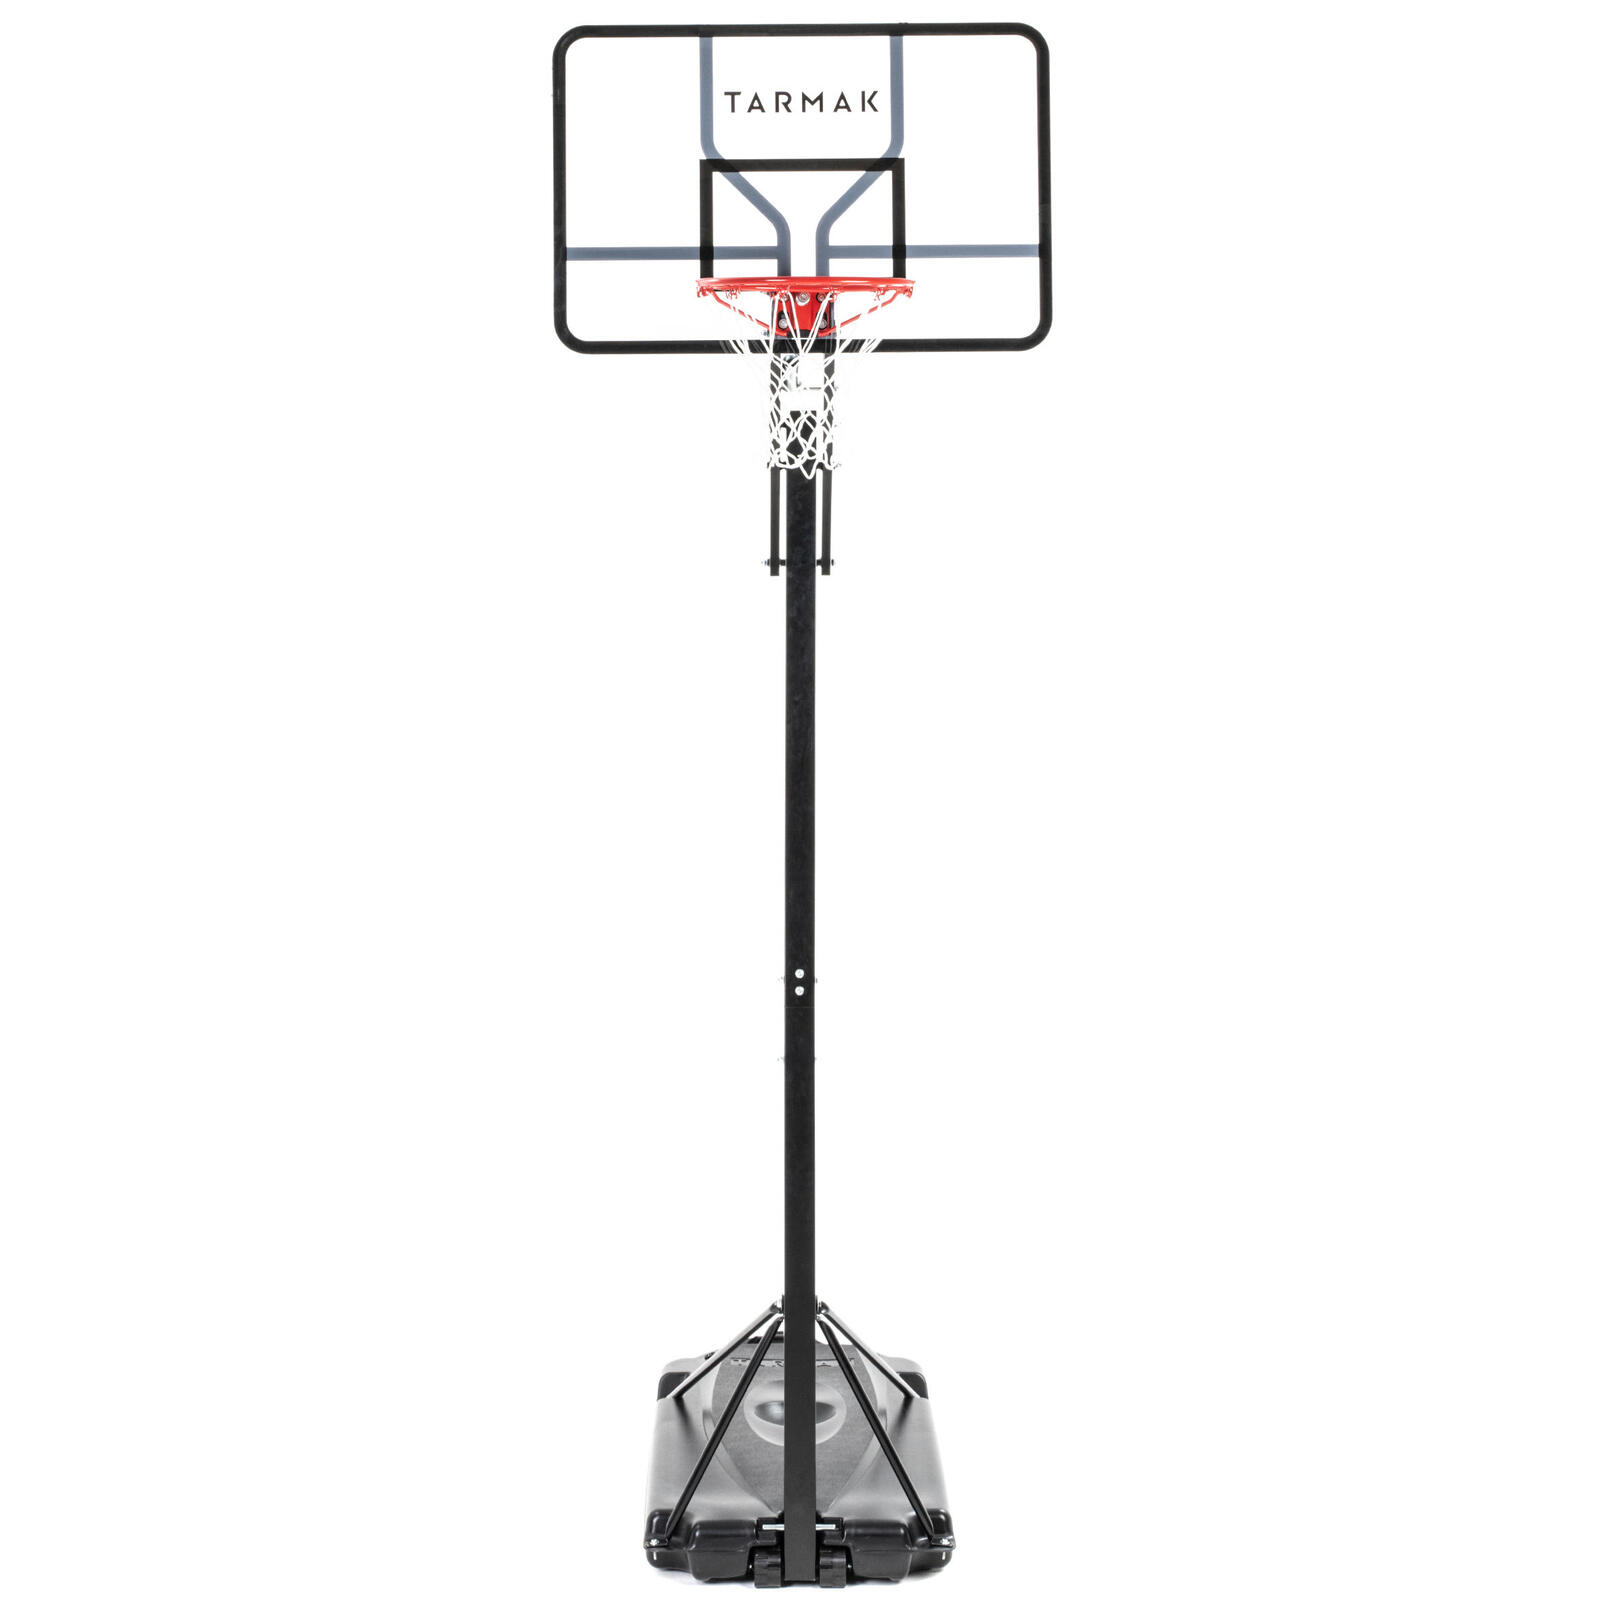 Pro basketball hoop stand black adjusts from 2.2m to 3.05m